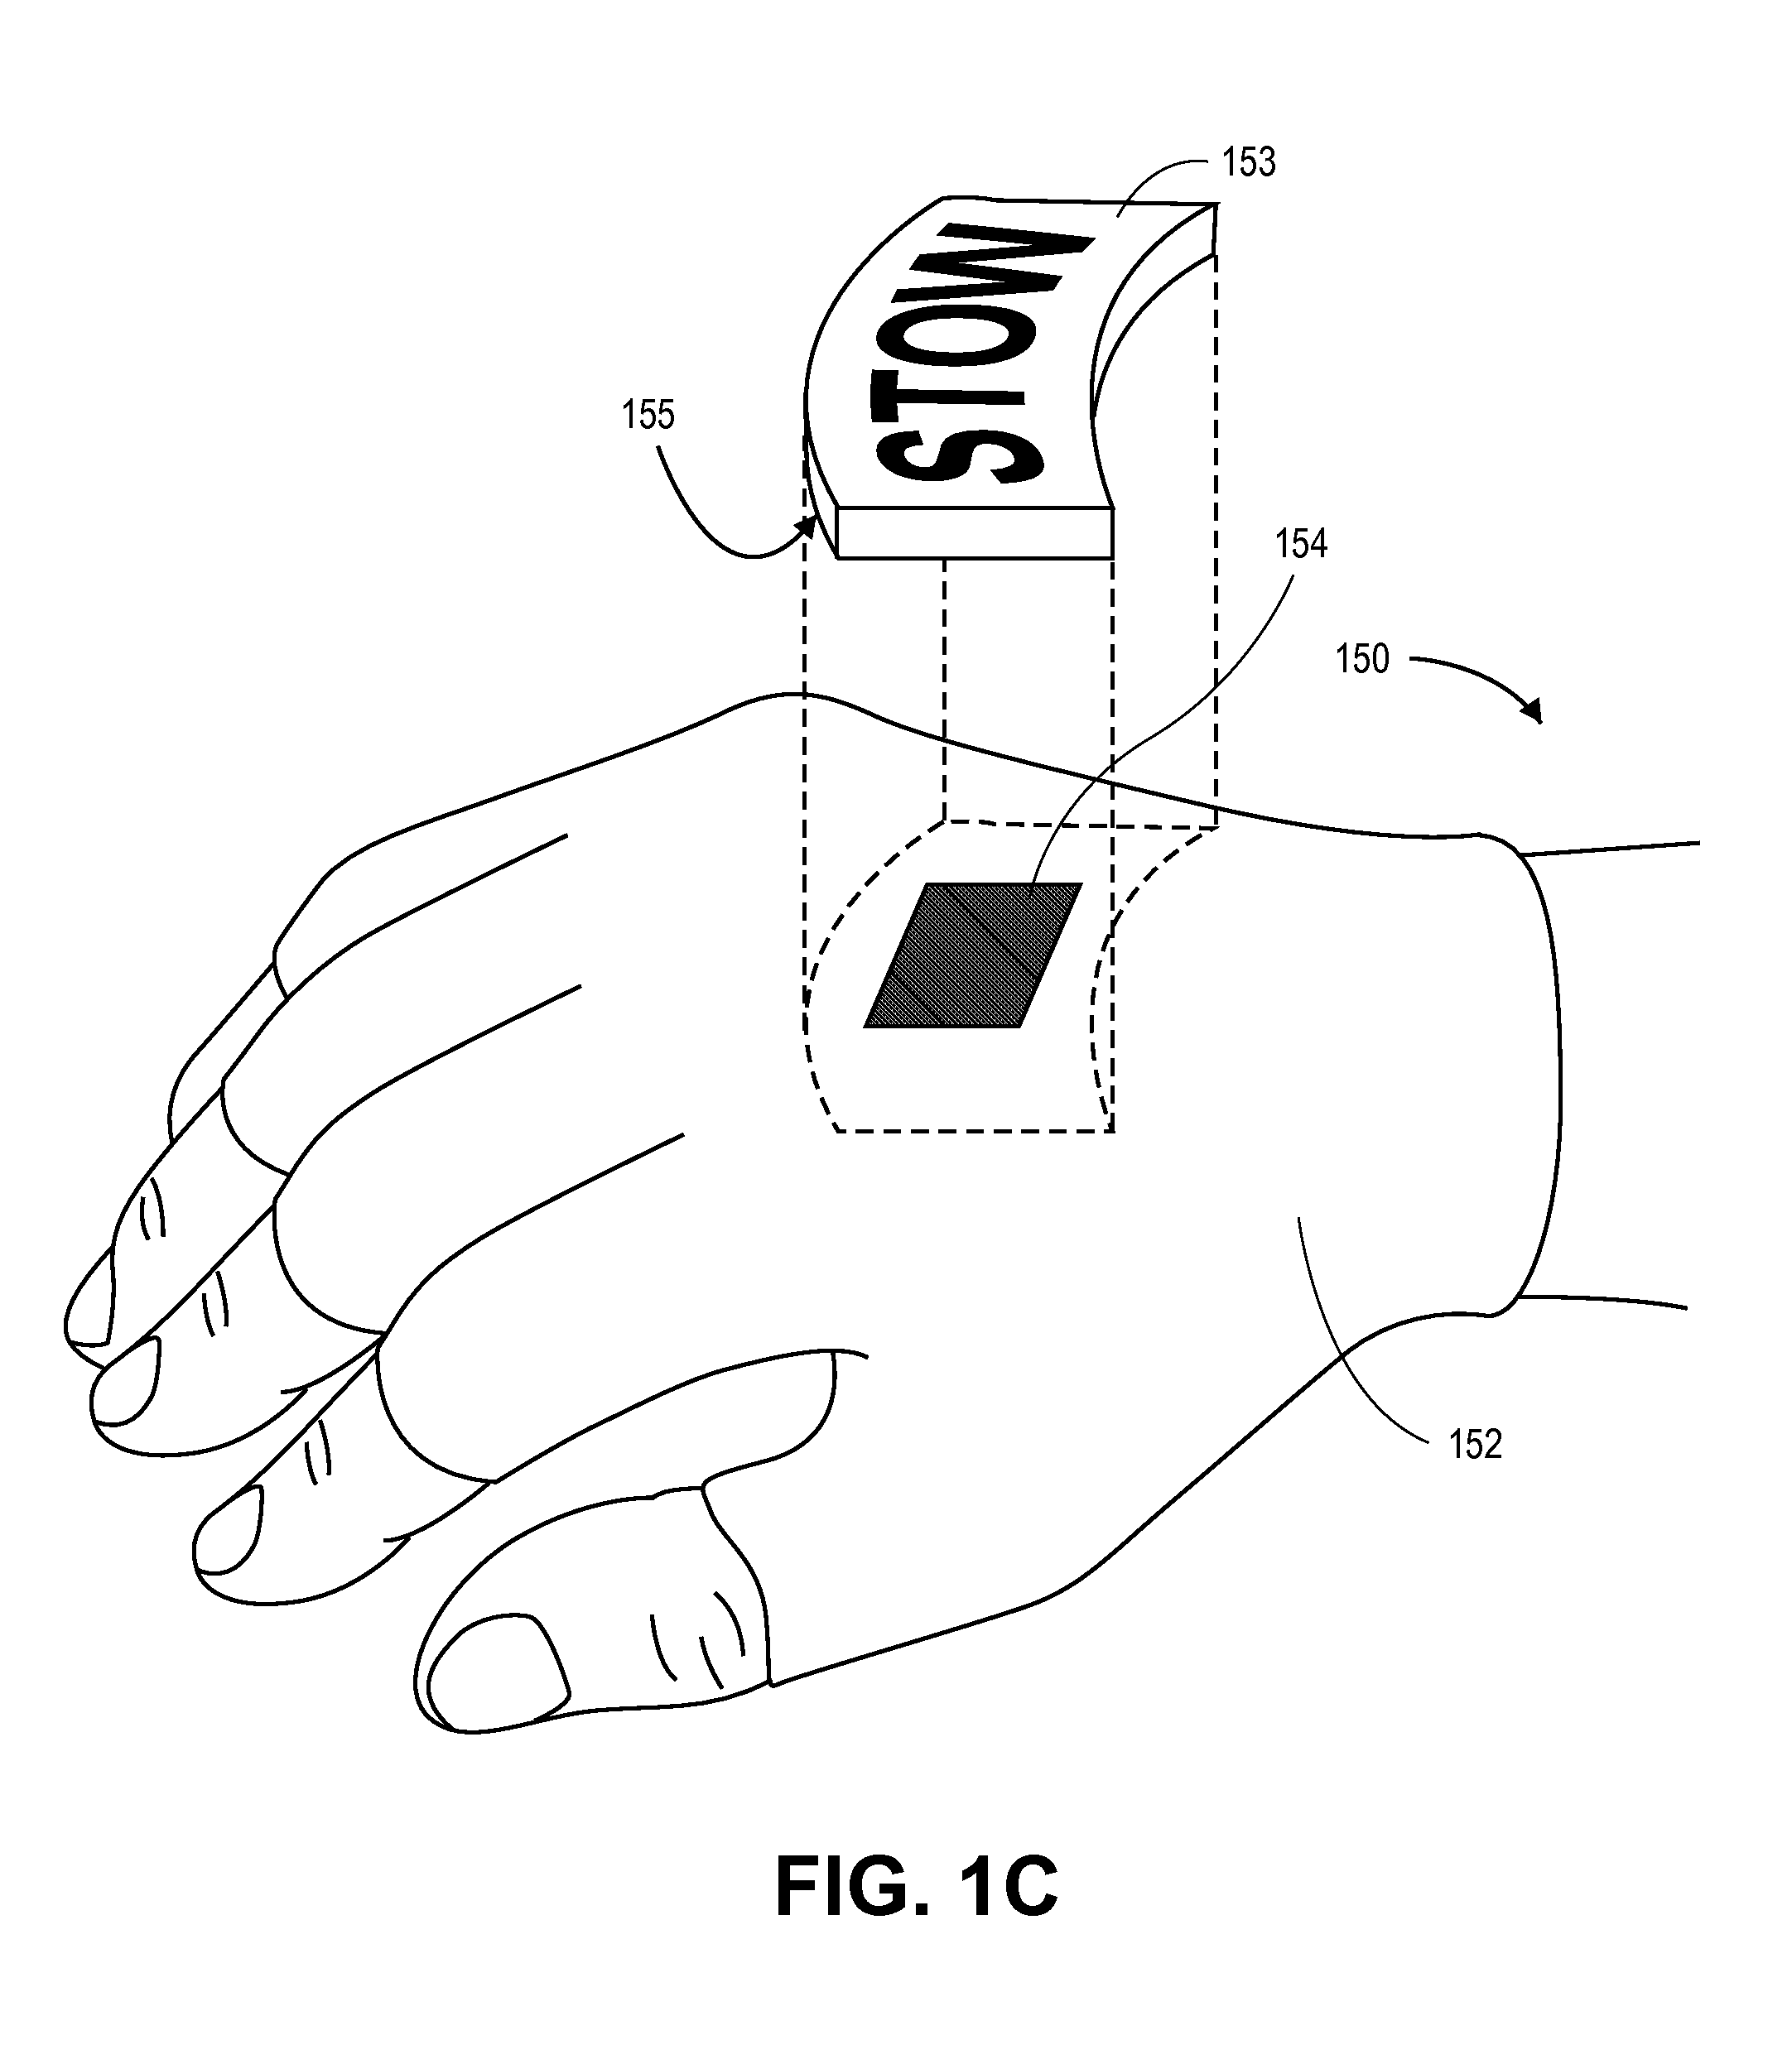 Wearable RFID Devices With Manually Activated RFID Tags